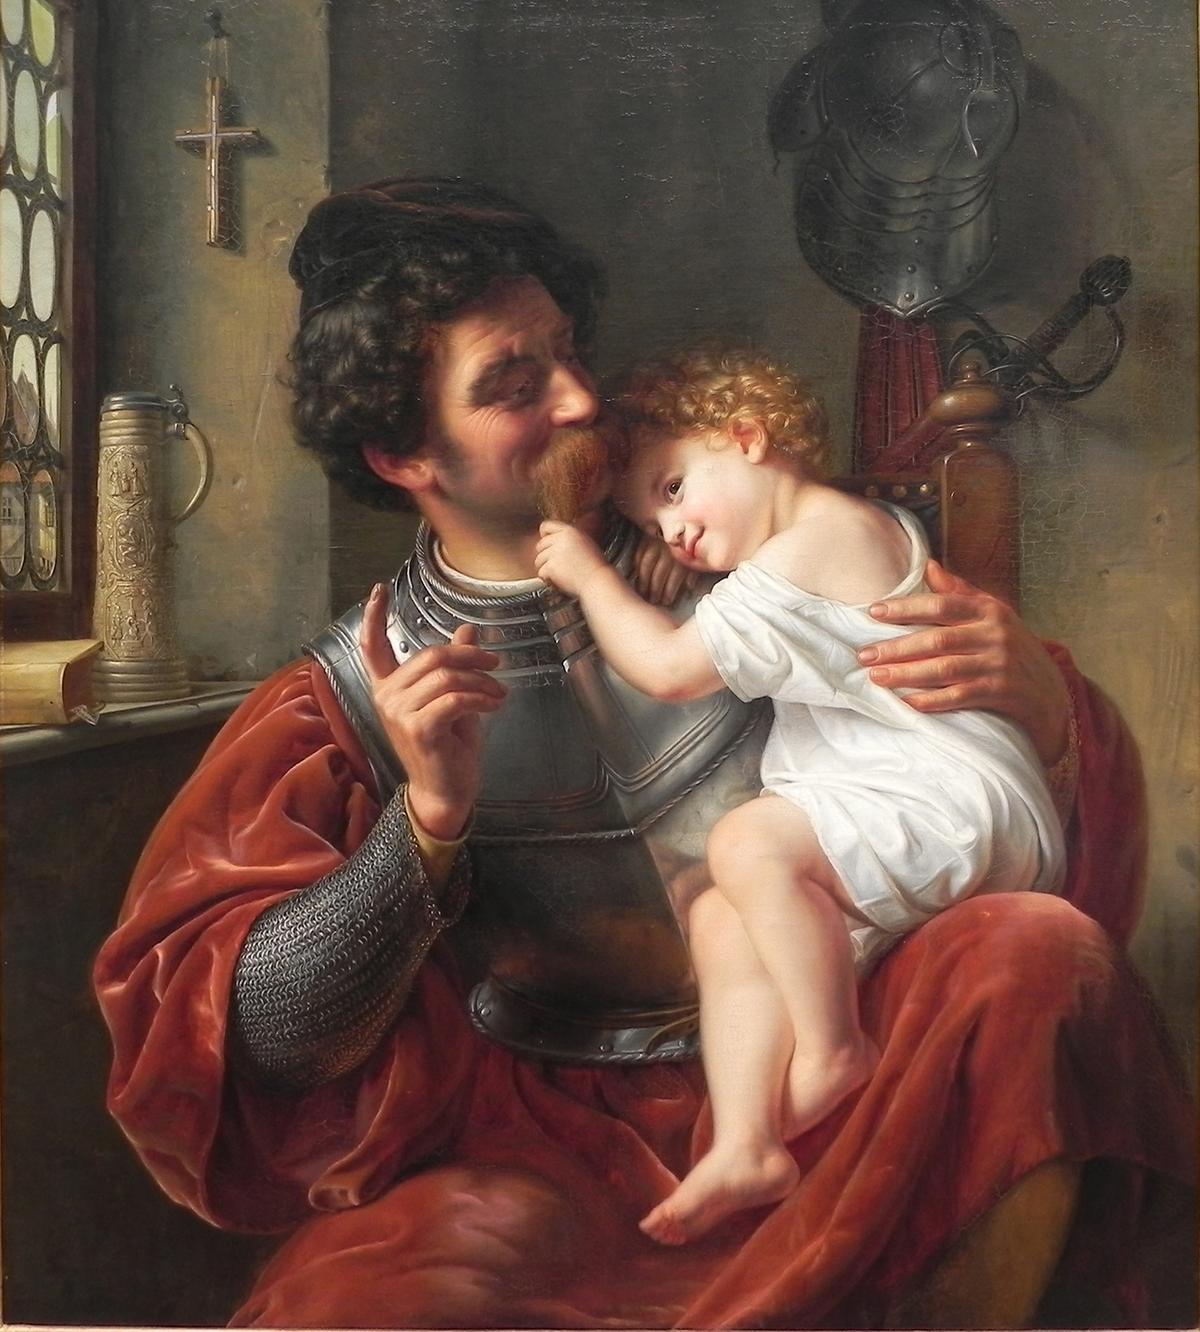 "The Warrior and His Child," 1832, by Theodor Hildebrandt. Oil on canvas. Old National Gallery, Berlin. (Public Domain)